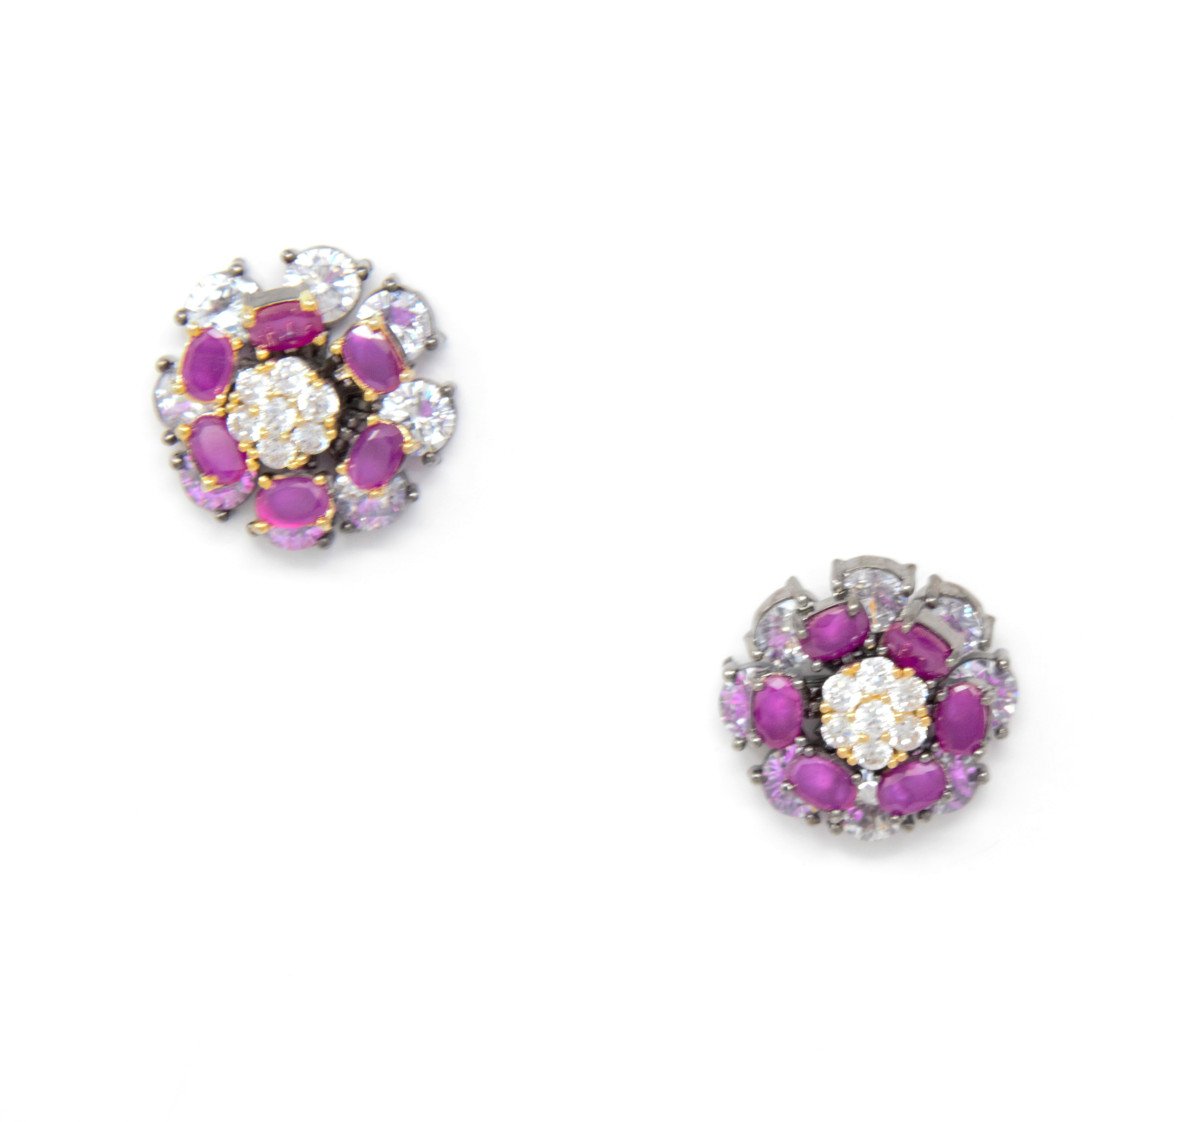 Victorian Style Stud Earrings with Embedded Pink and White Stones